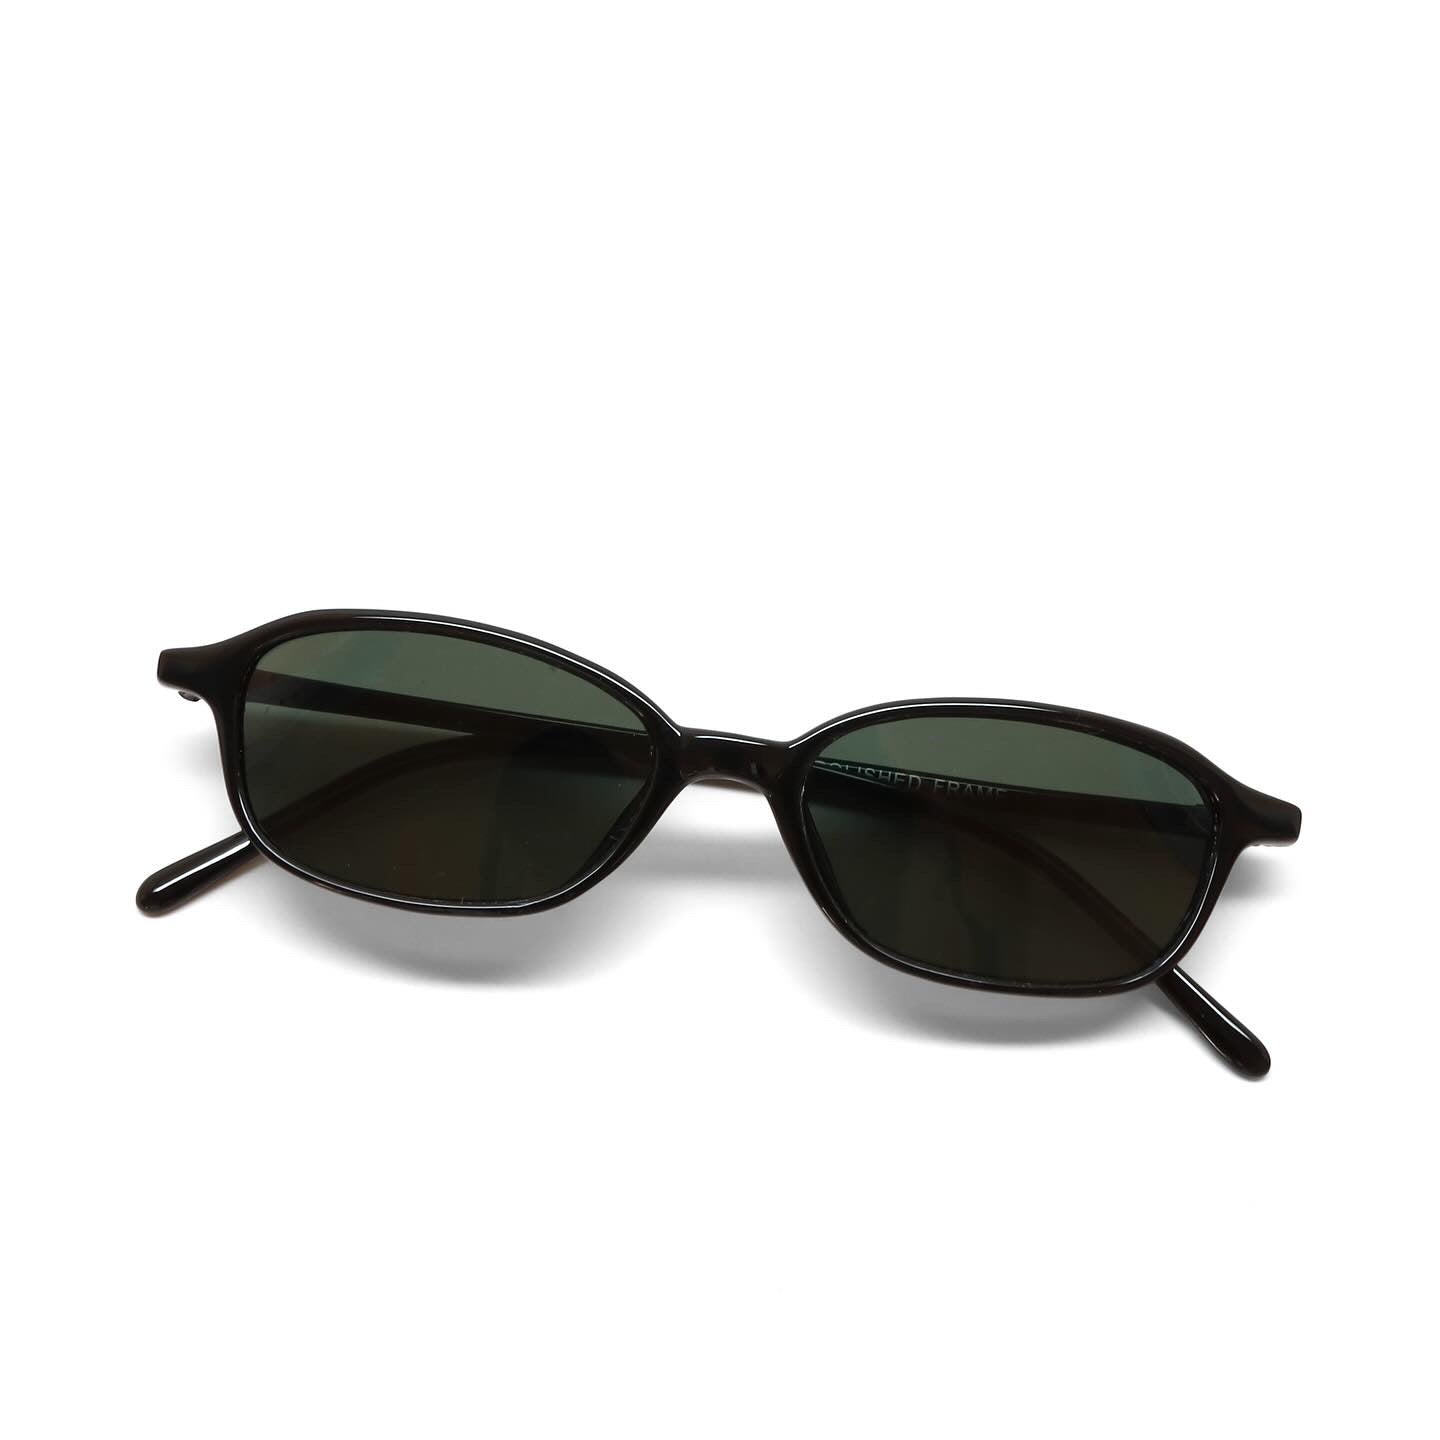 LAST CALL //Style 37// Deluxe Vintage 90s Deadstock Small Chic Oval Sunglasses - Black